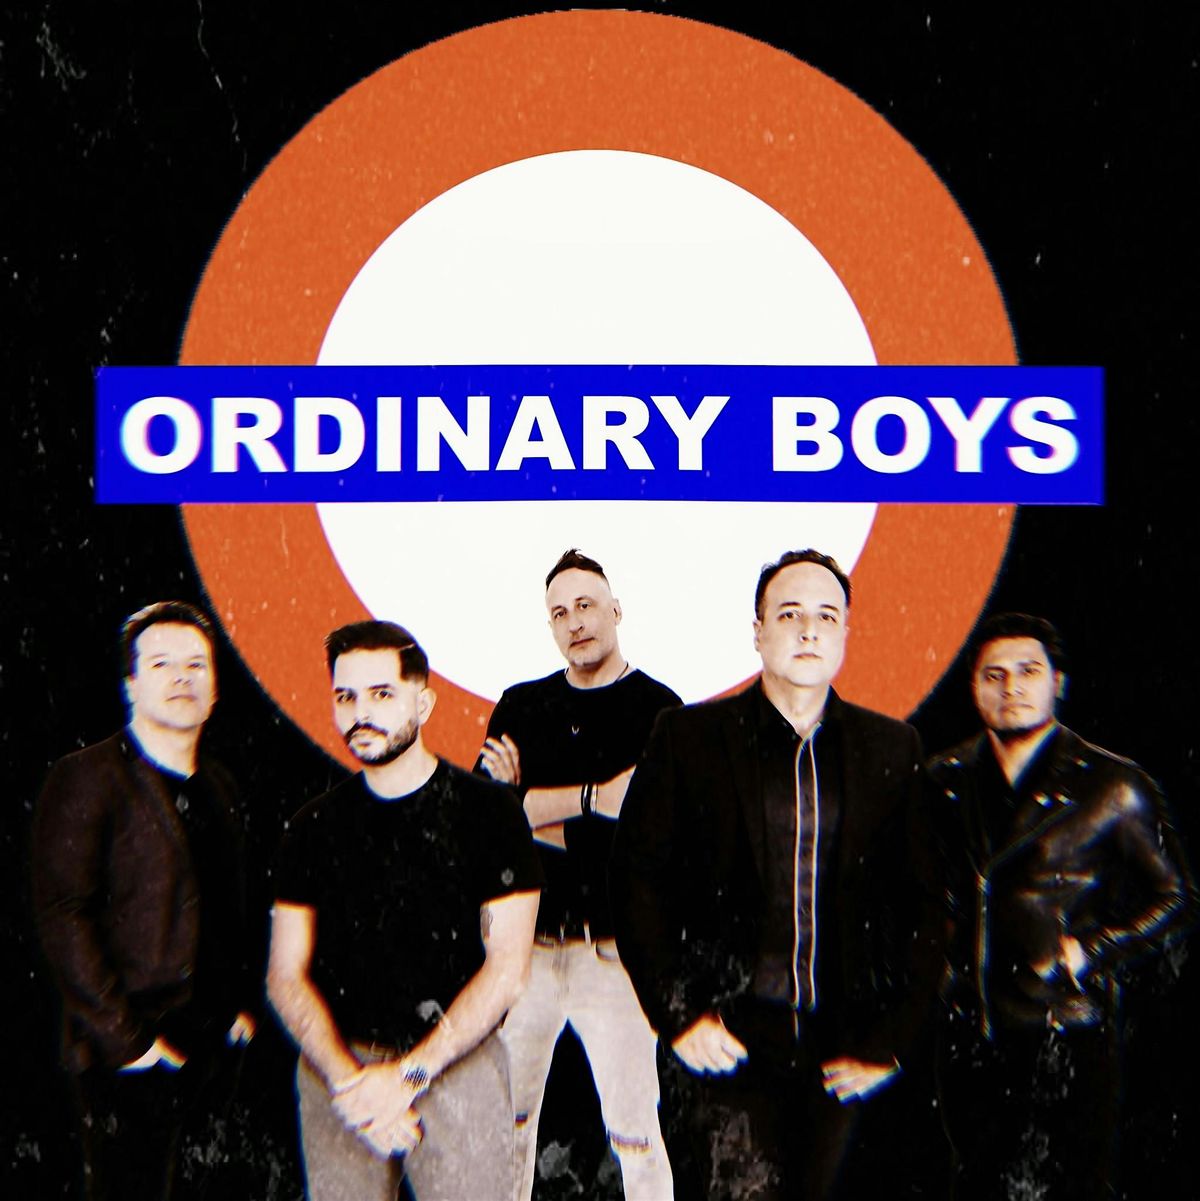 Ordinary Boys - Tribute to The Smiths & Morrissey